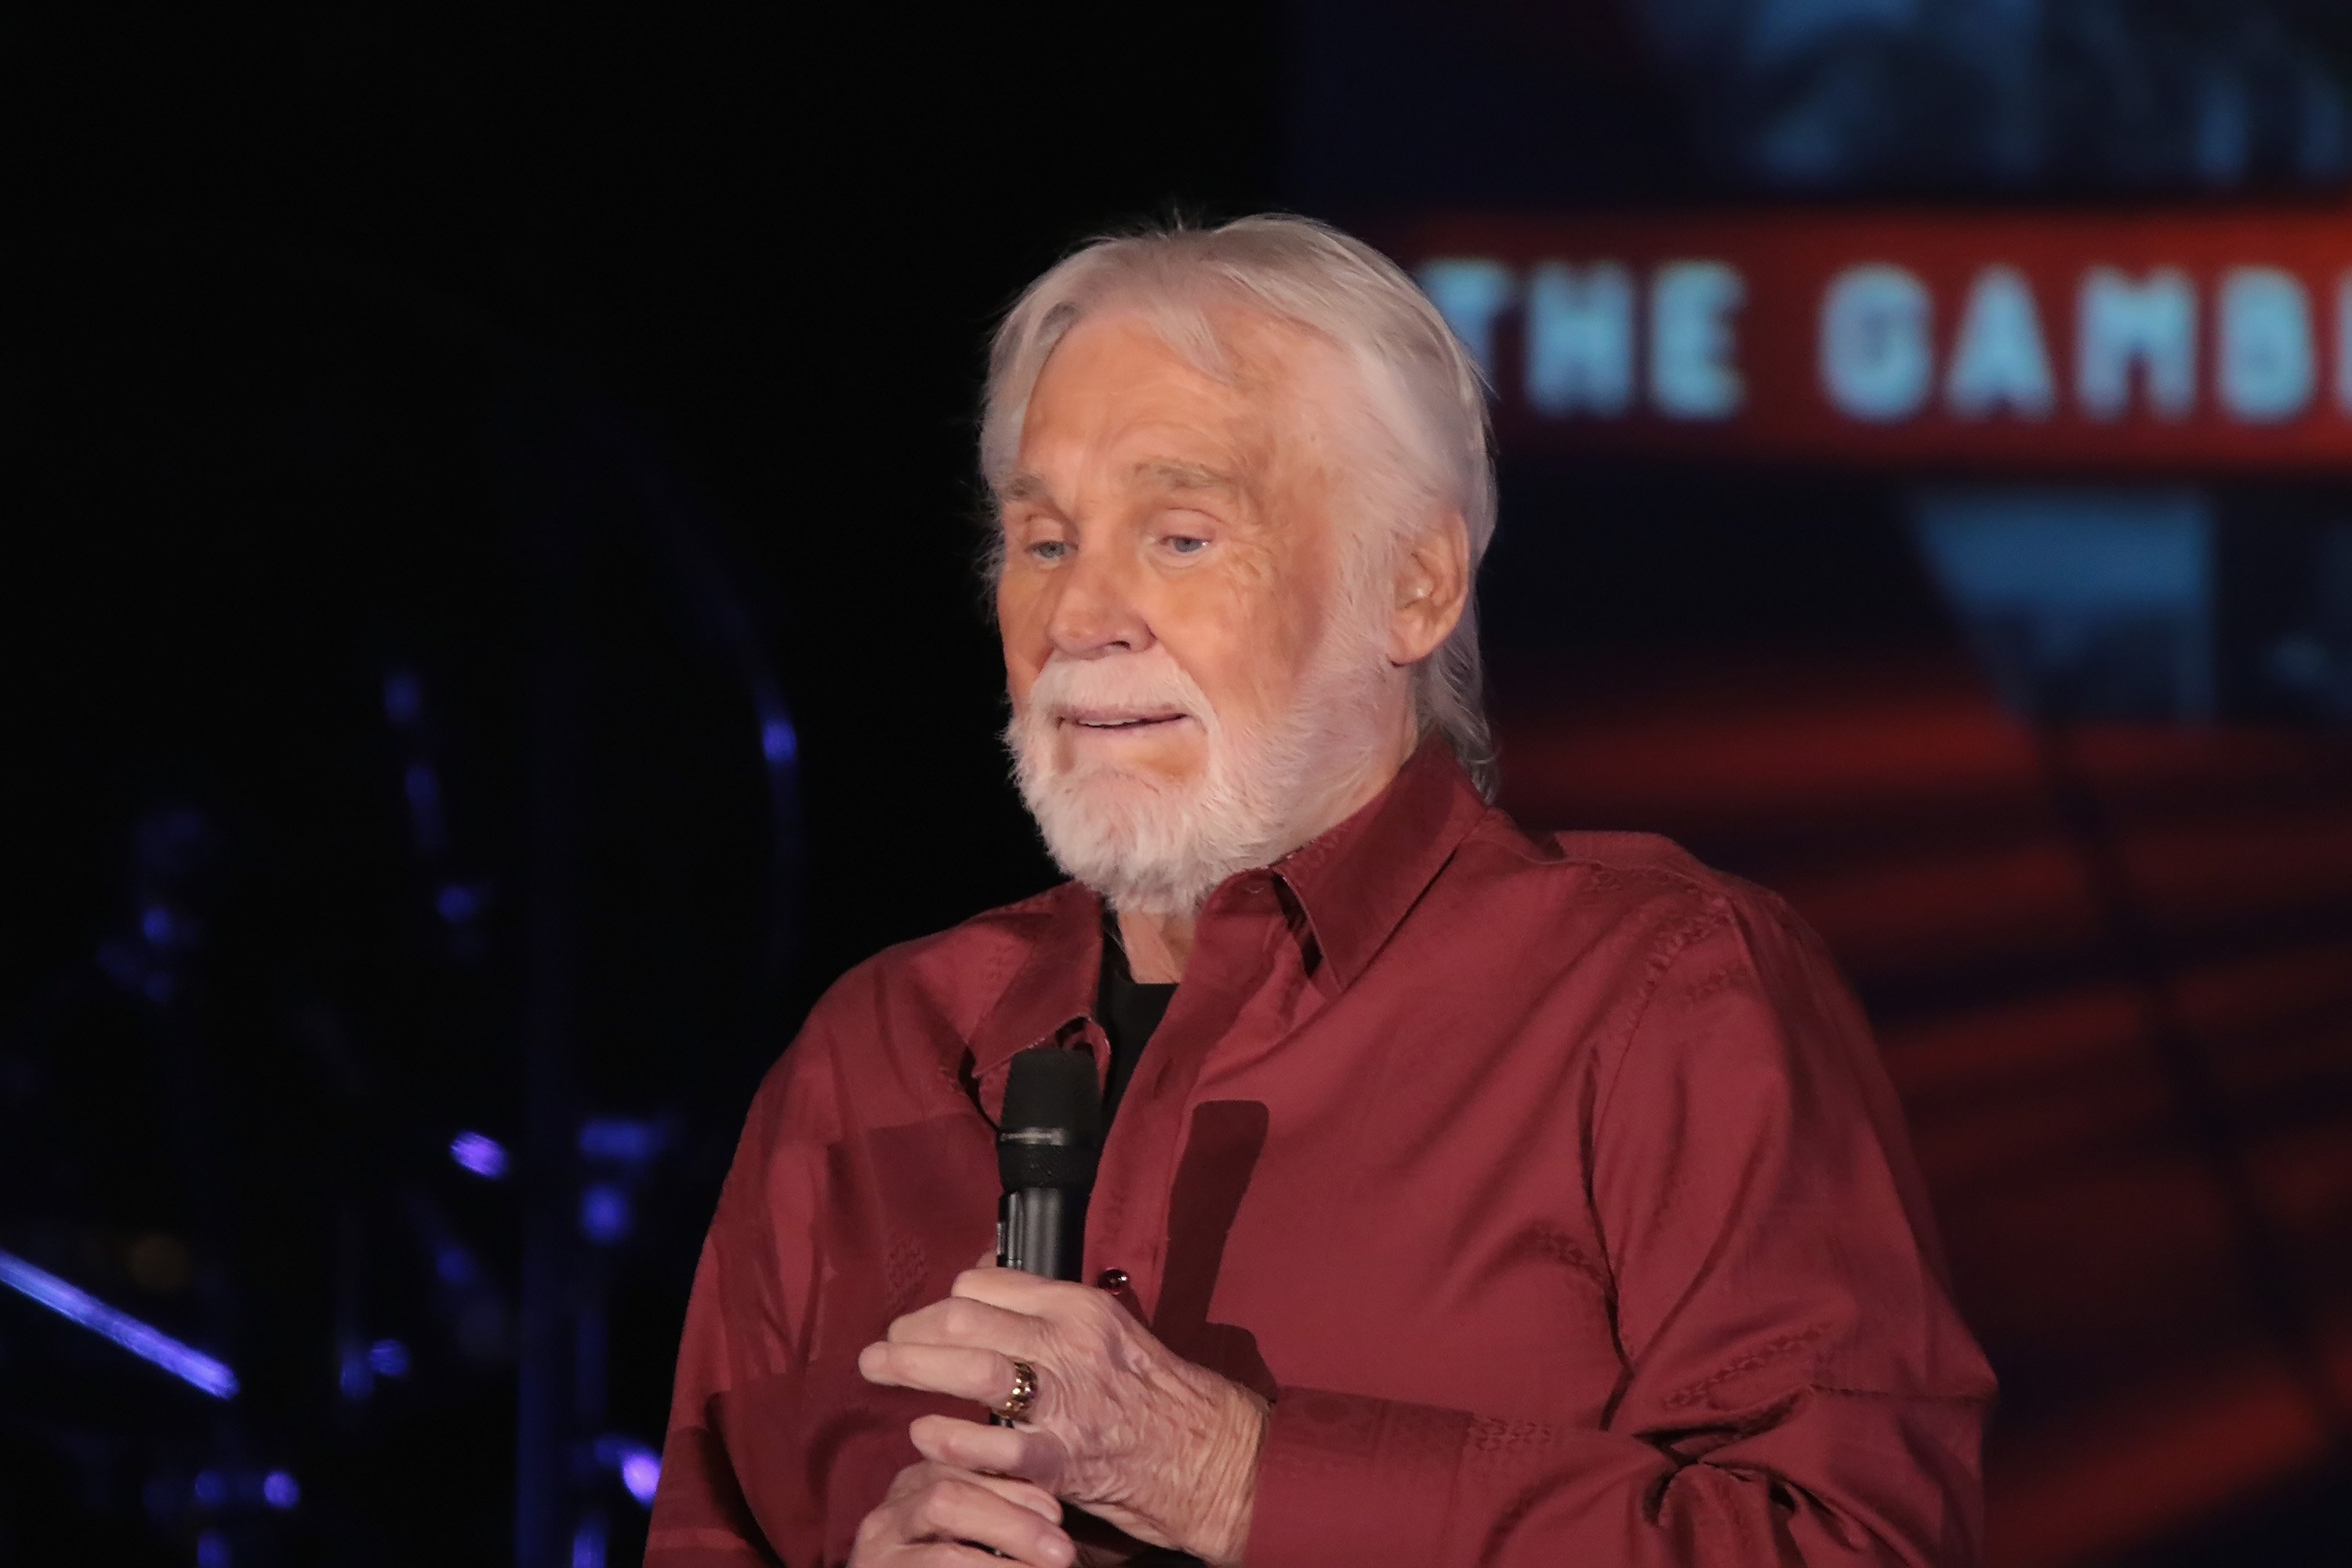 Kenny Rogers performing in concert at Golden Nugget Casino on December 9, 2017 in Atlantic City, New Jersey. / Source: Getty Images